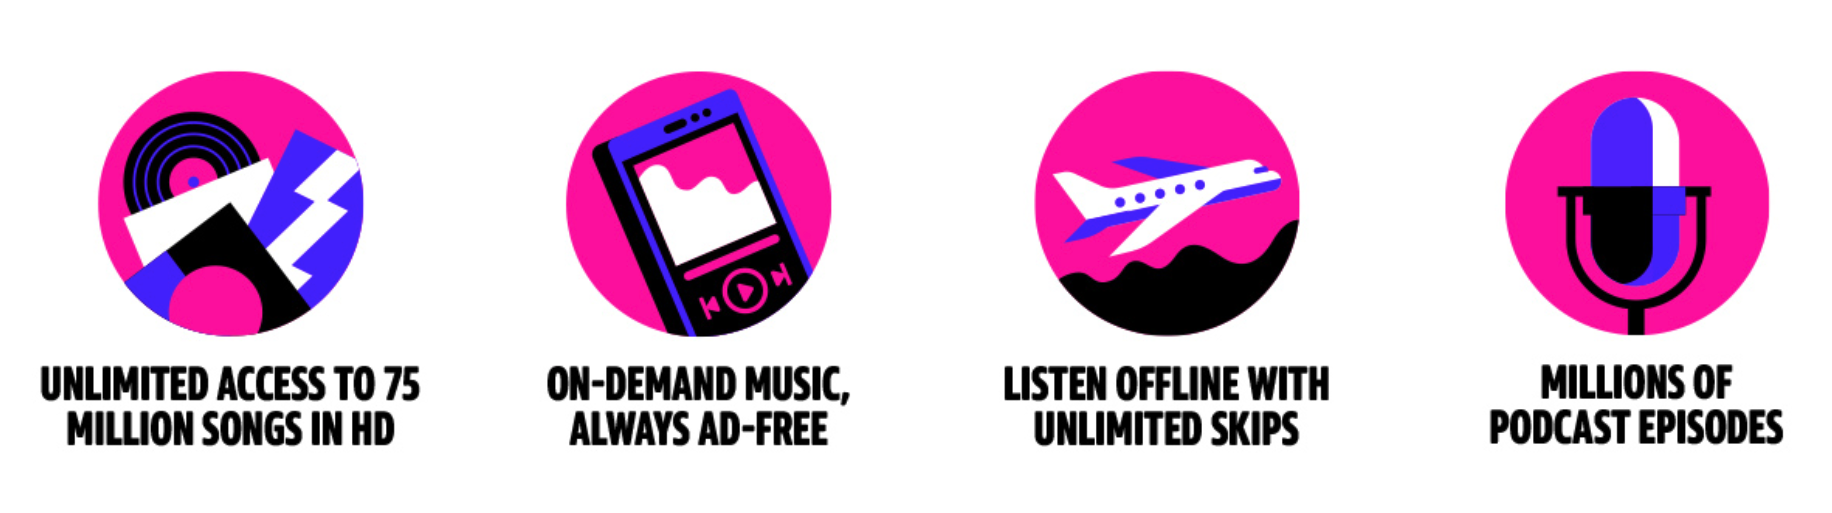 graphic showing all the Amazon Music features: unlimited access to 75 million songs; on-demand music, always ad-free; listen offline with unlimited skips; and millions of podcast episodes